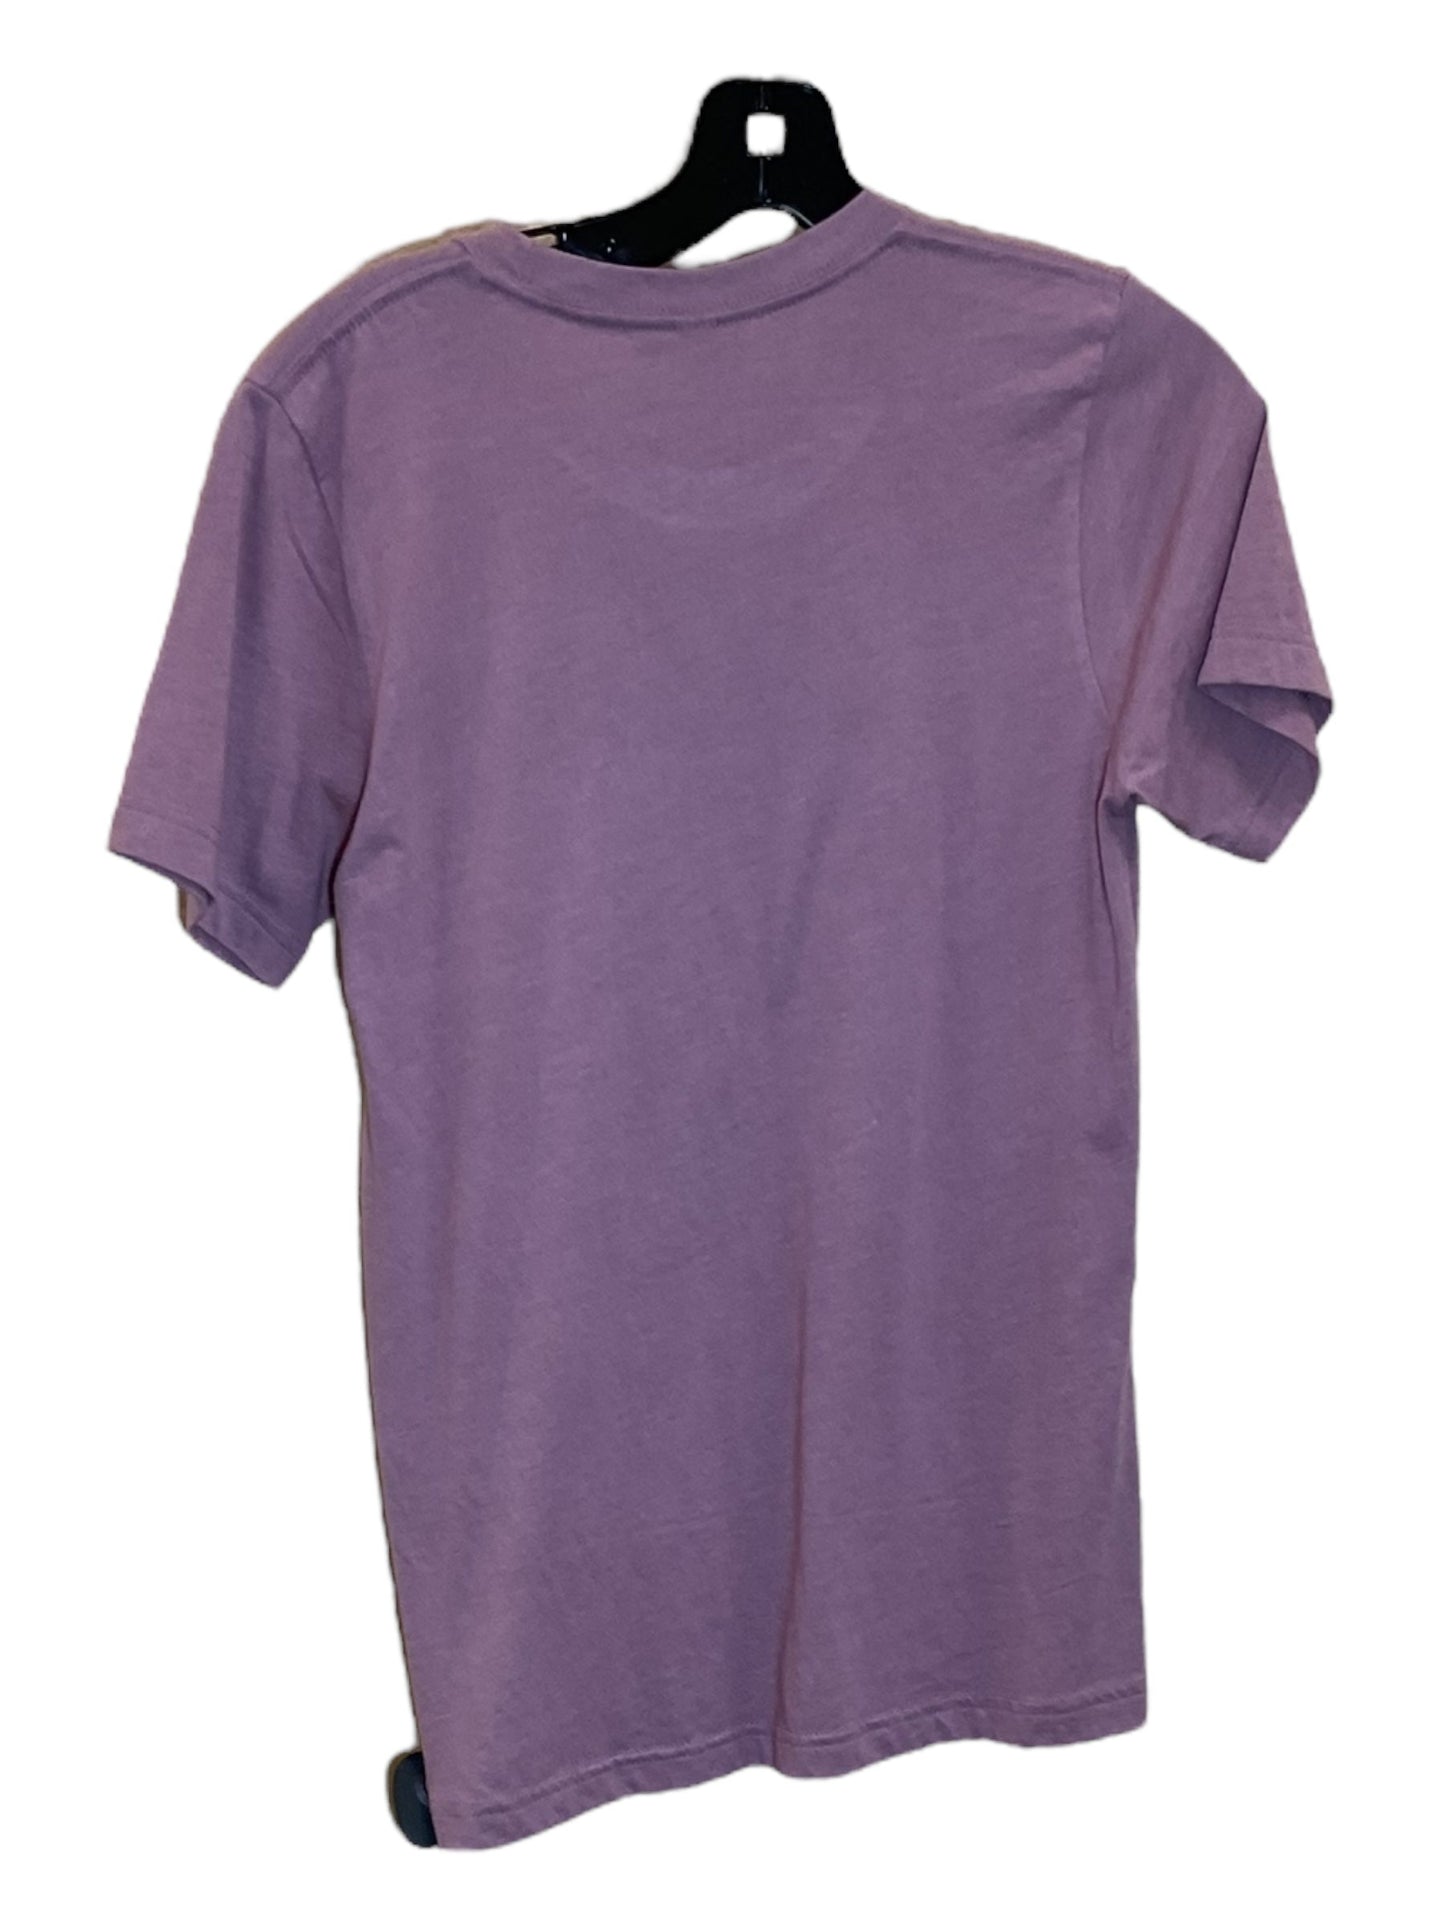 Purple Top Short Sleeve Clothes Mentor, Size S